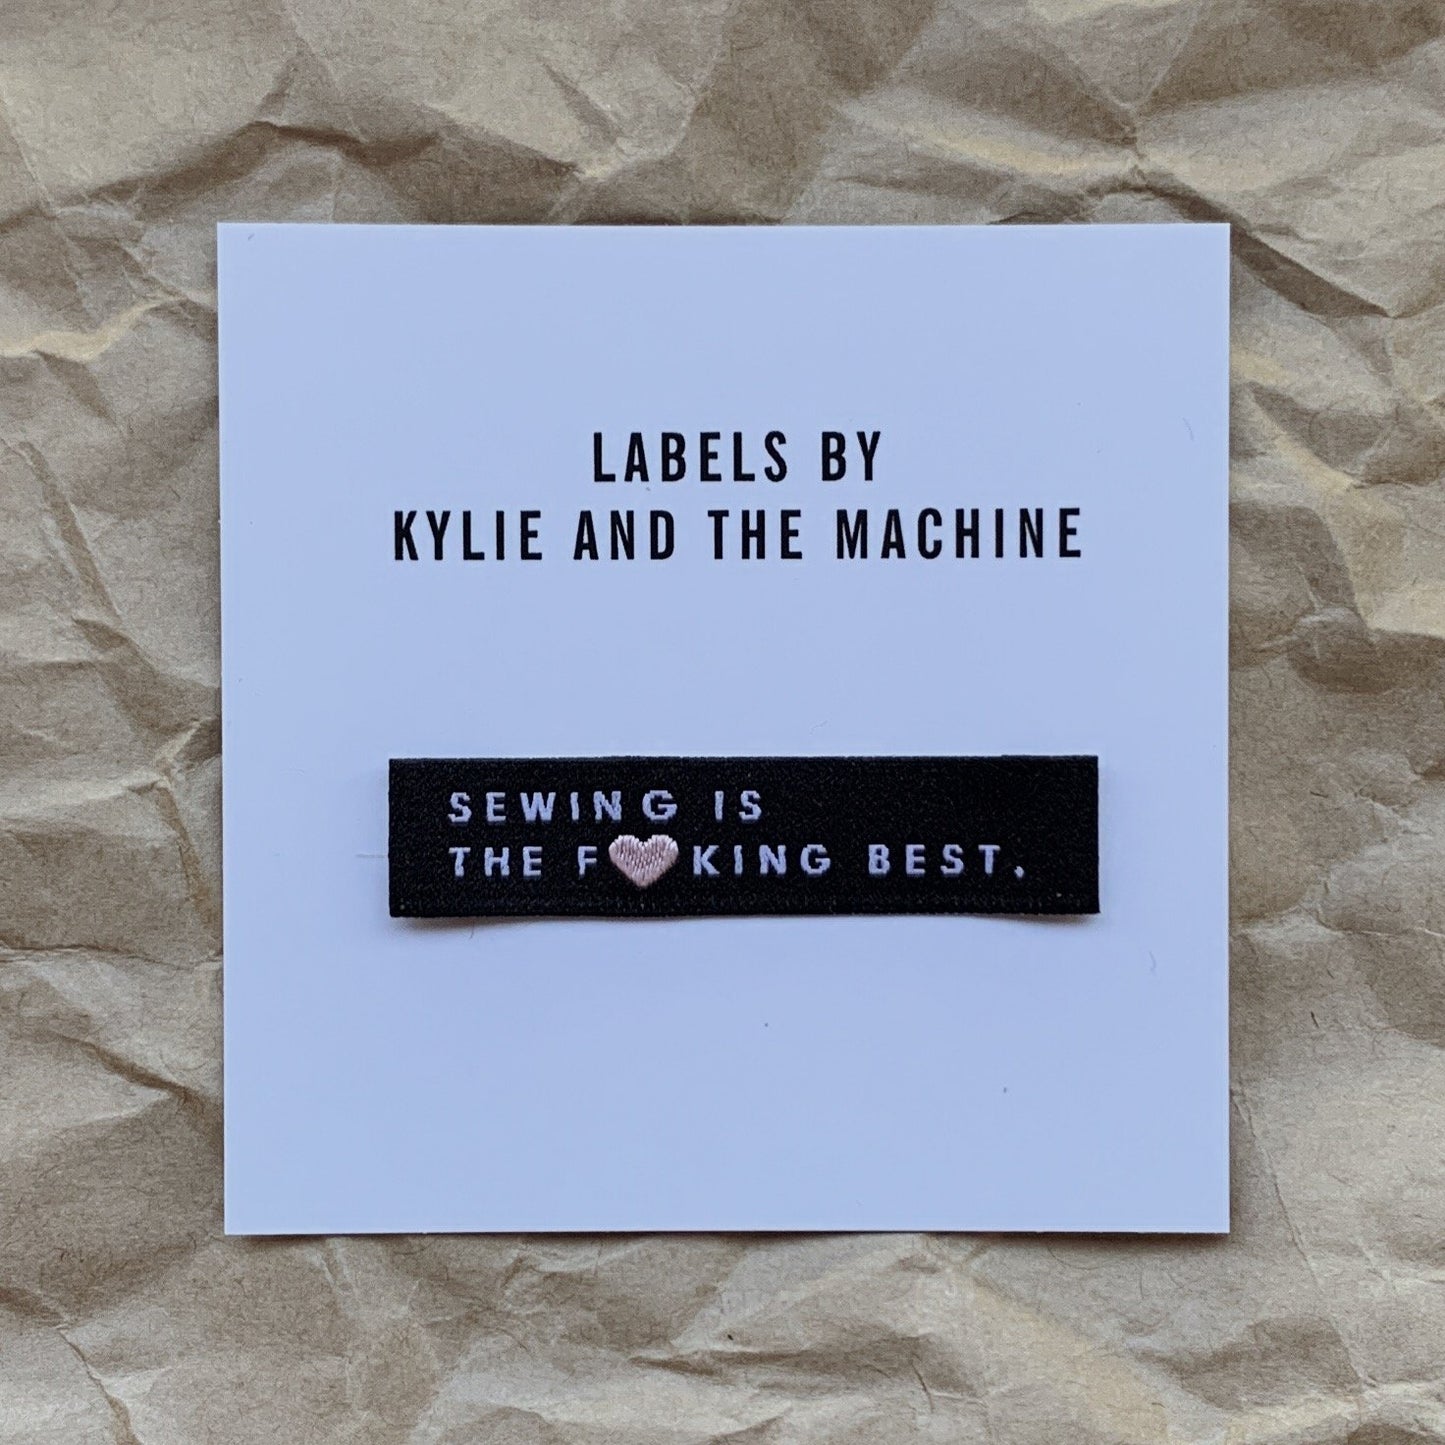 Kylie and the Machine “Sewing Is The F**king Best" Woven Labels 8 pack